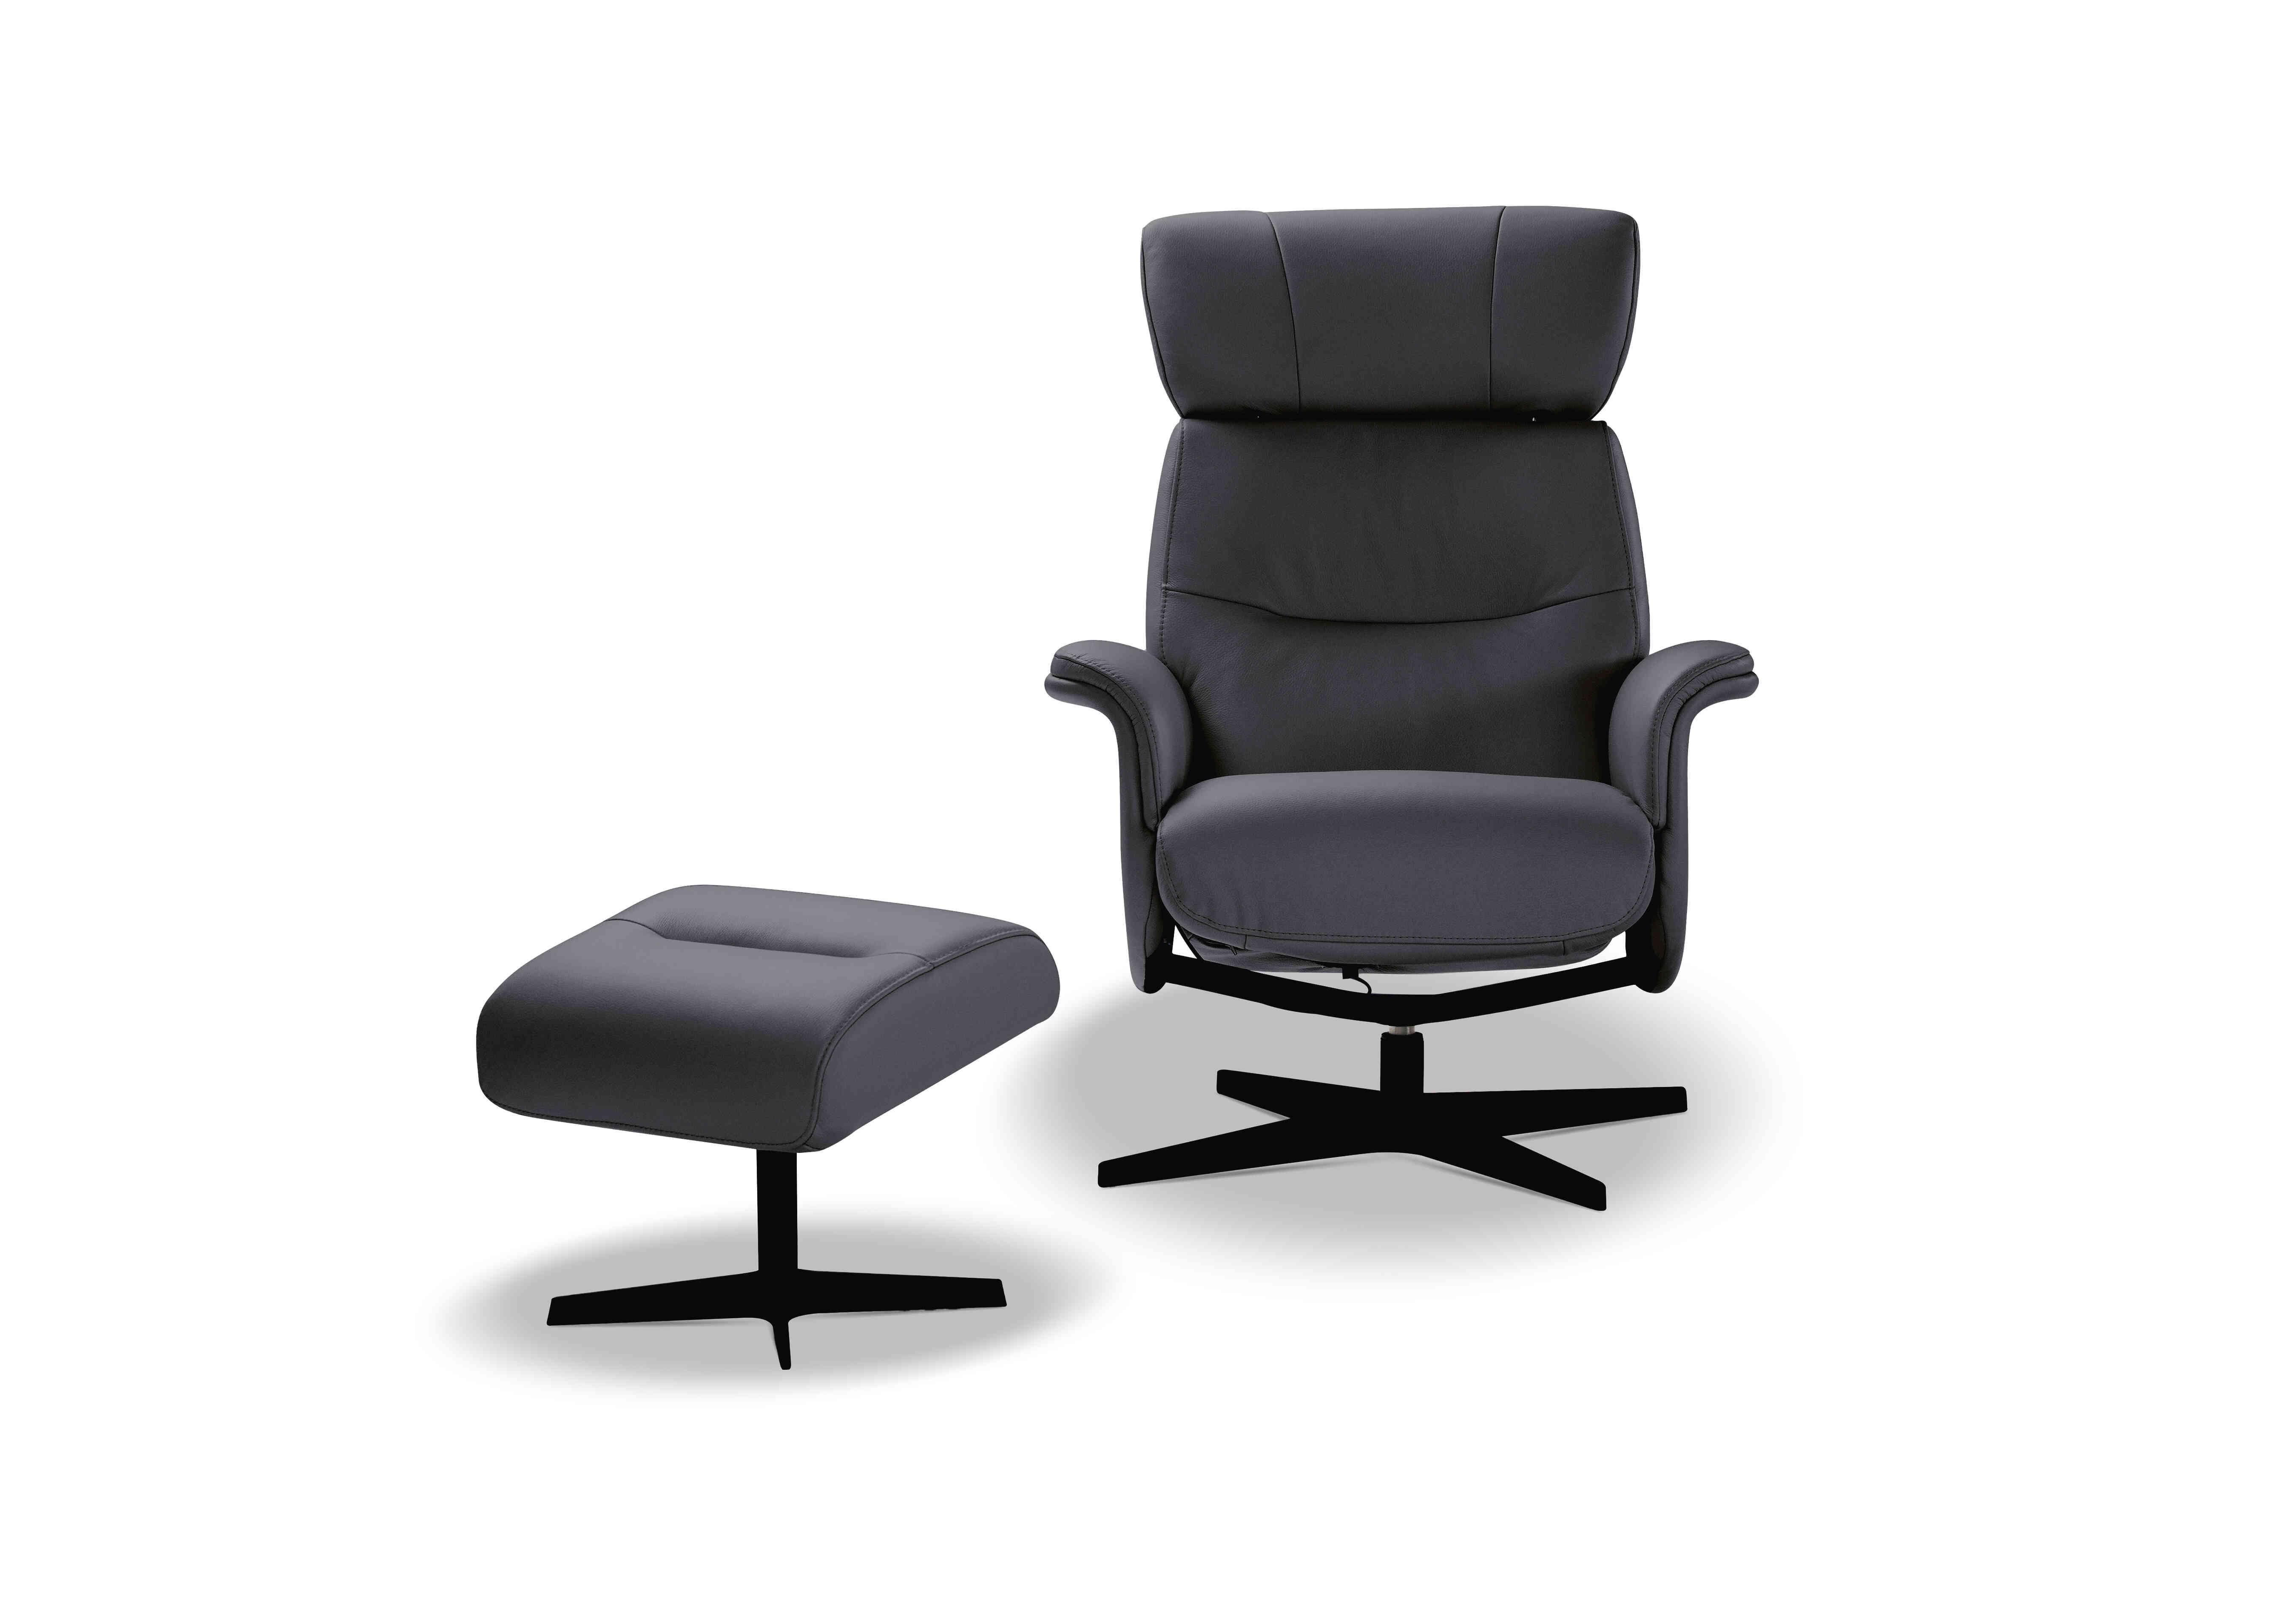 Tricolour Enzo Leather Swivel Manual Recliner Chair and Stool in Torello 81 Blu-S An Ft on Furniture Village